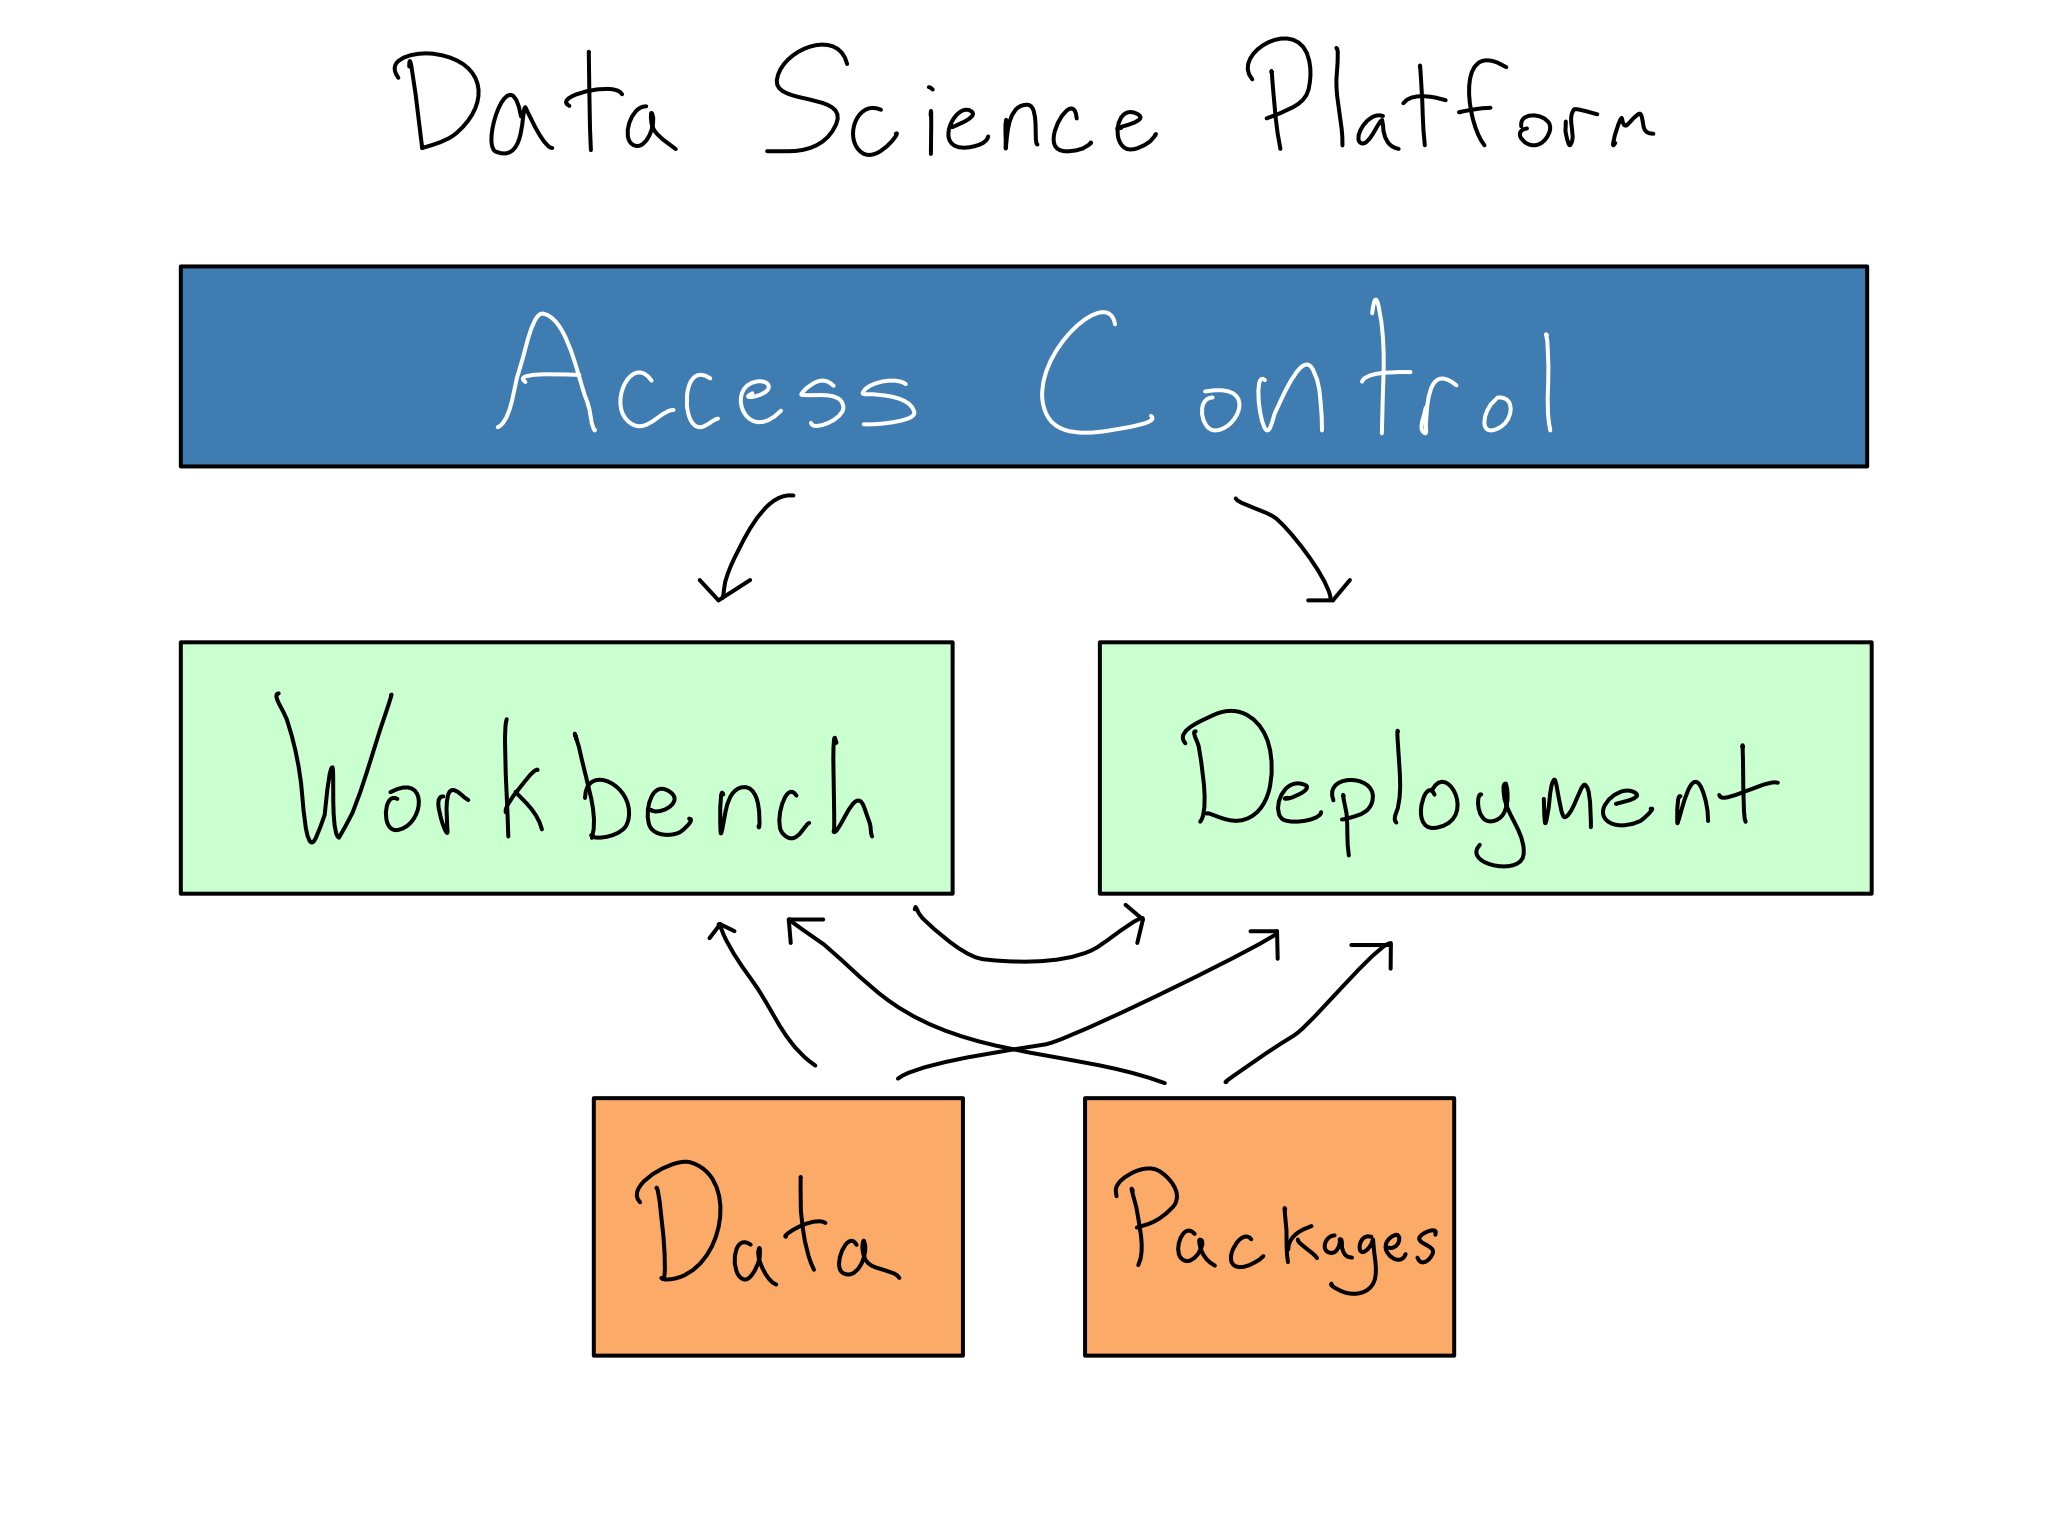 An image of a data science platform with access control going to a workbench and deployment and data and package supporting.